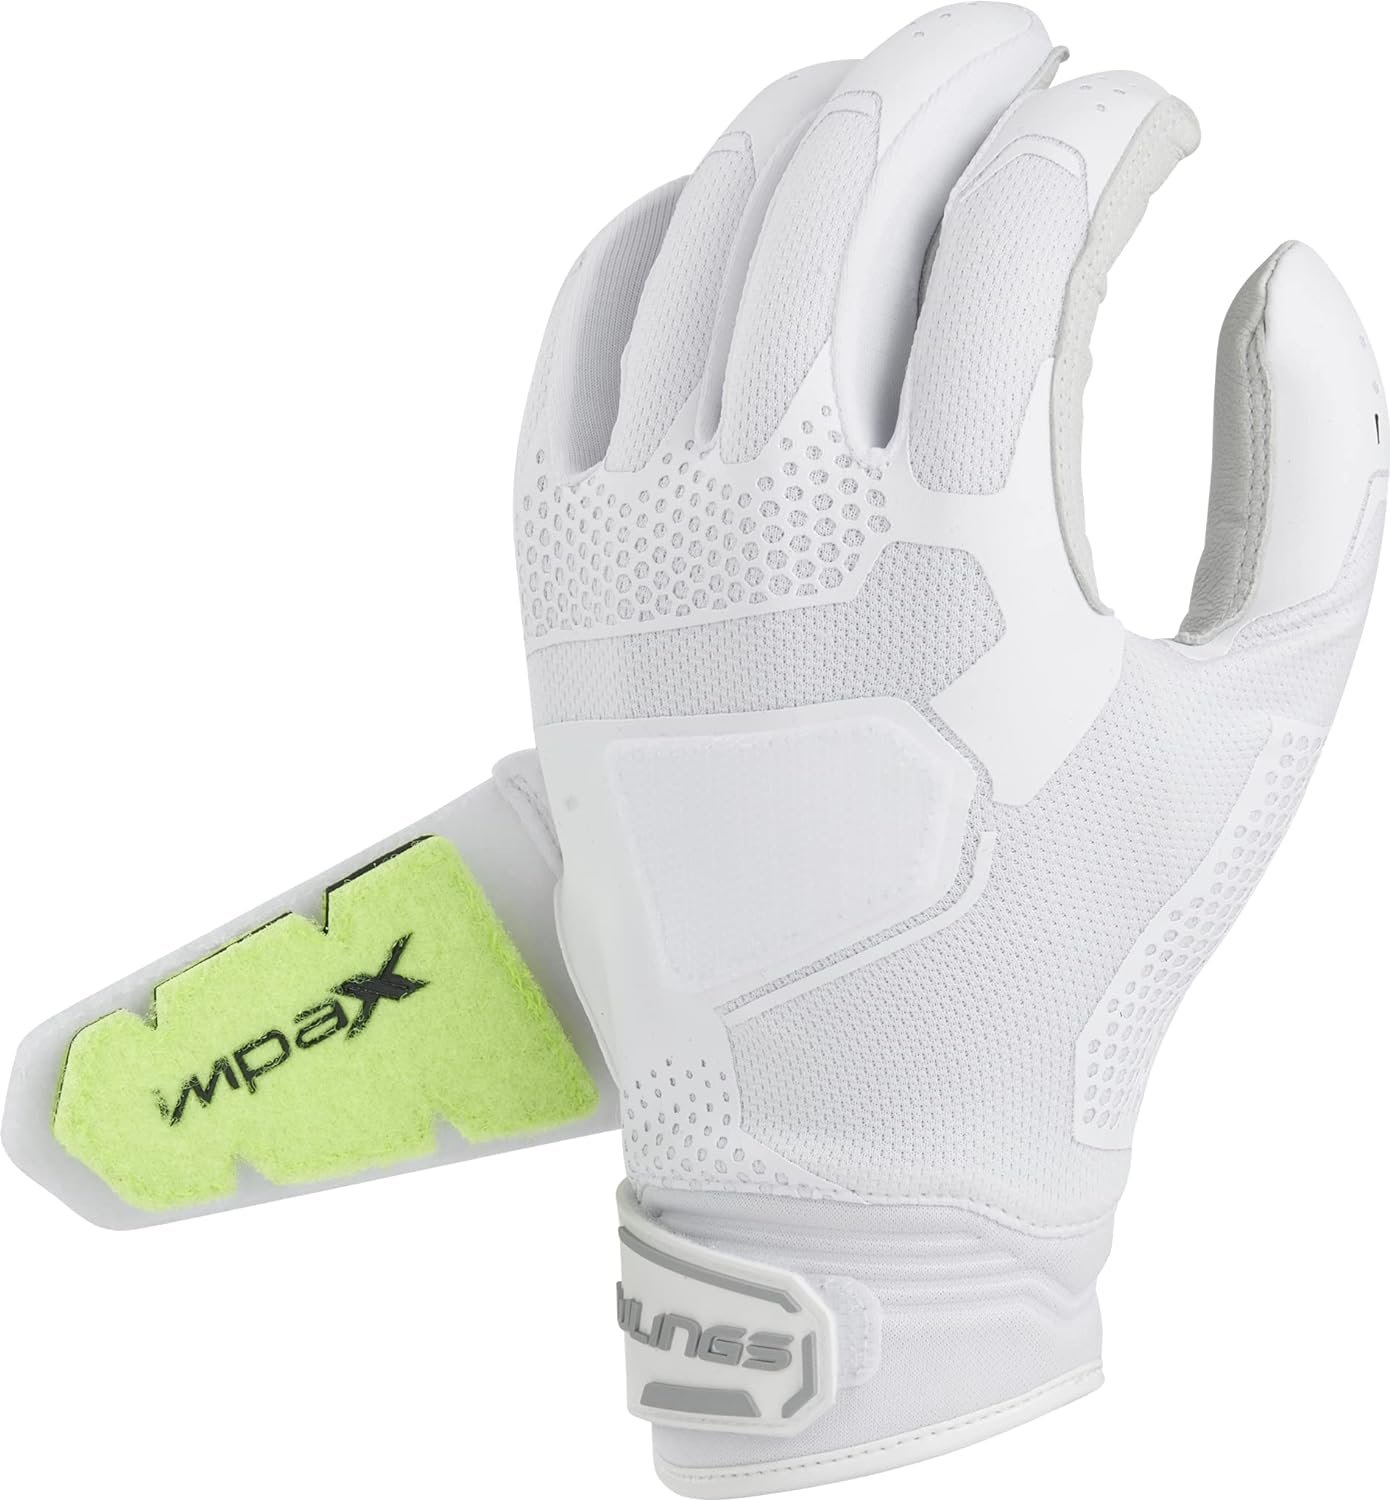 Rawlings | Workhorse PRO Fastpitch Softball Batting Gloves | Double Strap | Impax Pad | Adult | Multiple Colors